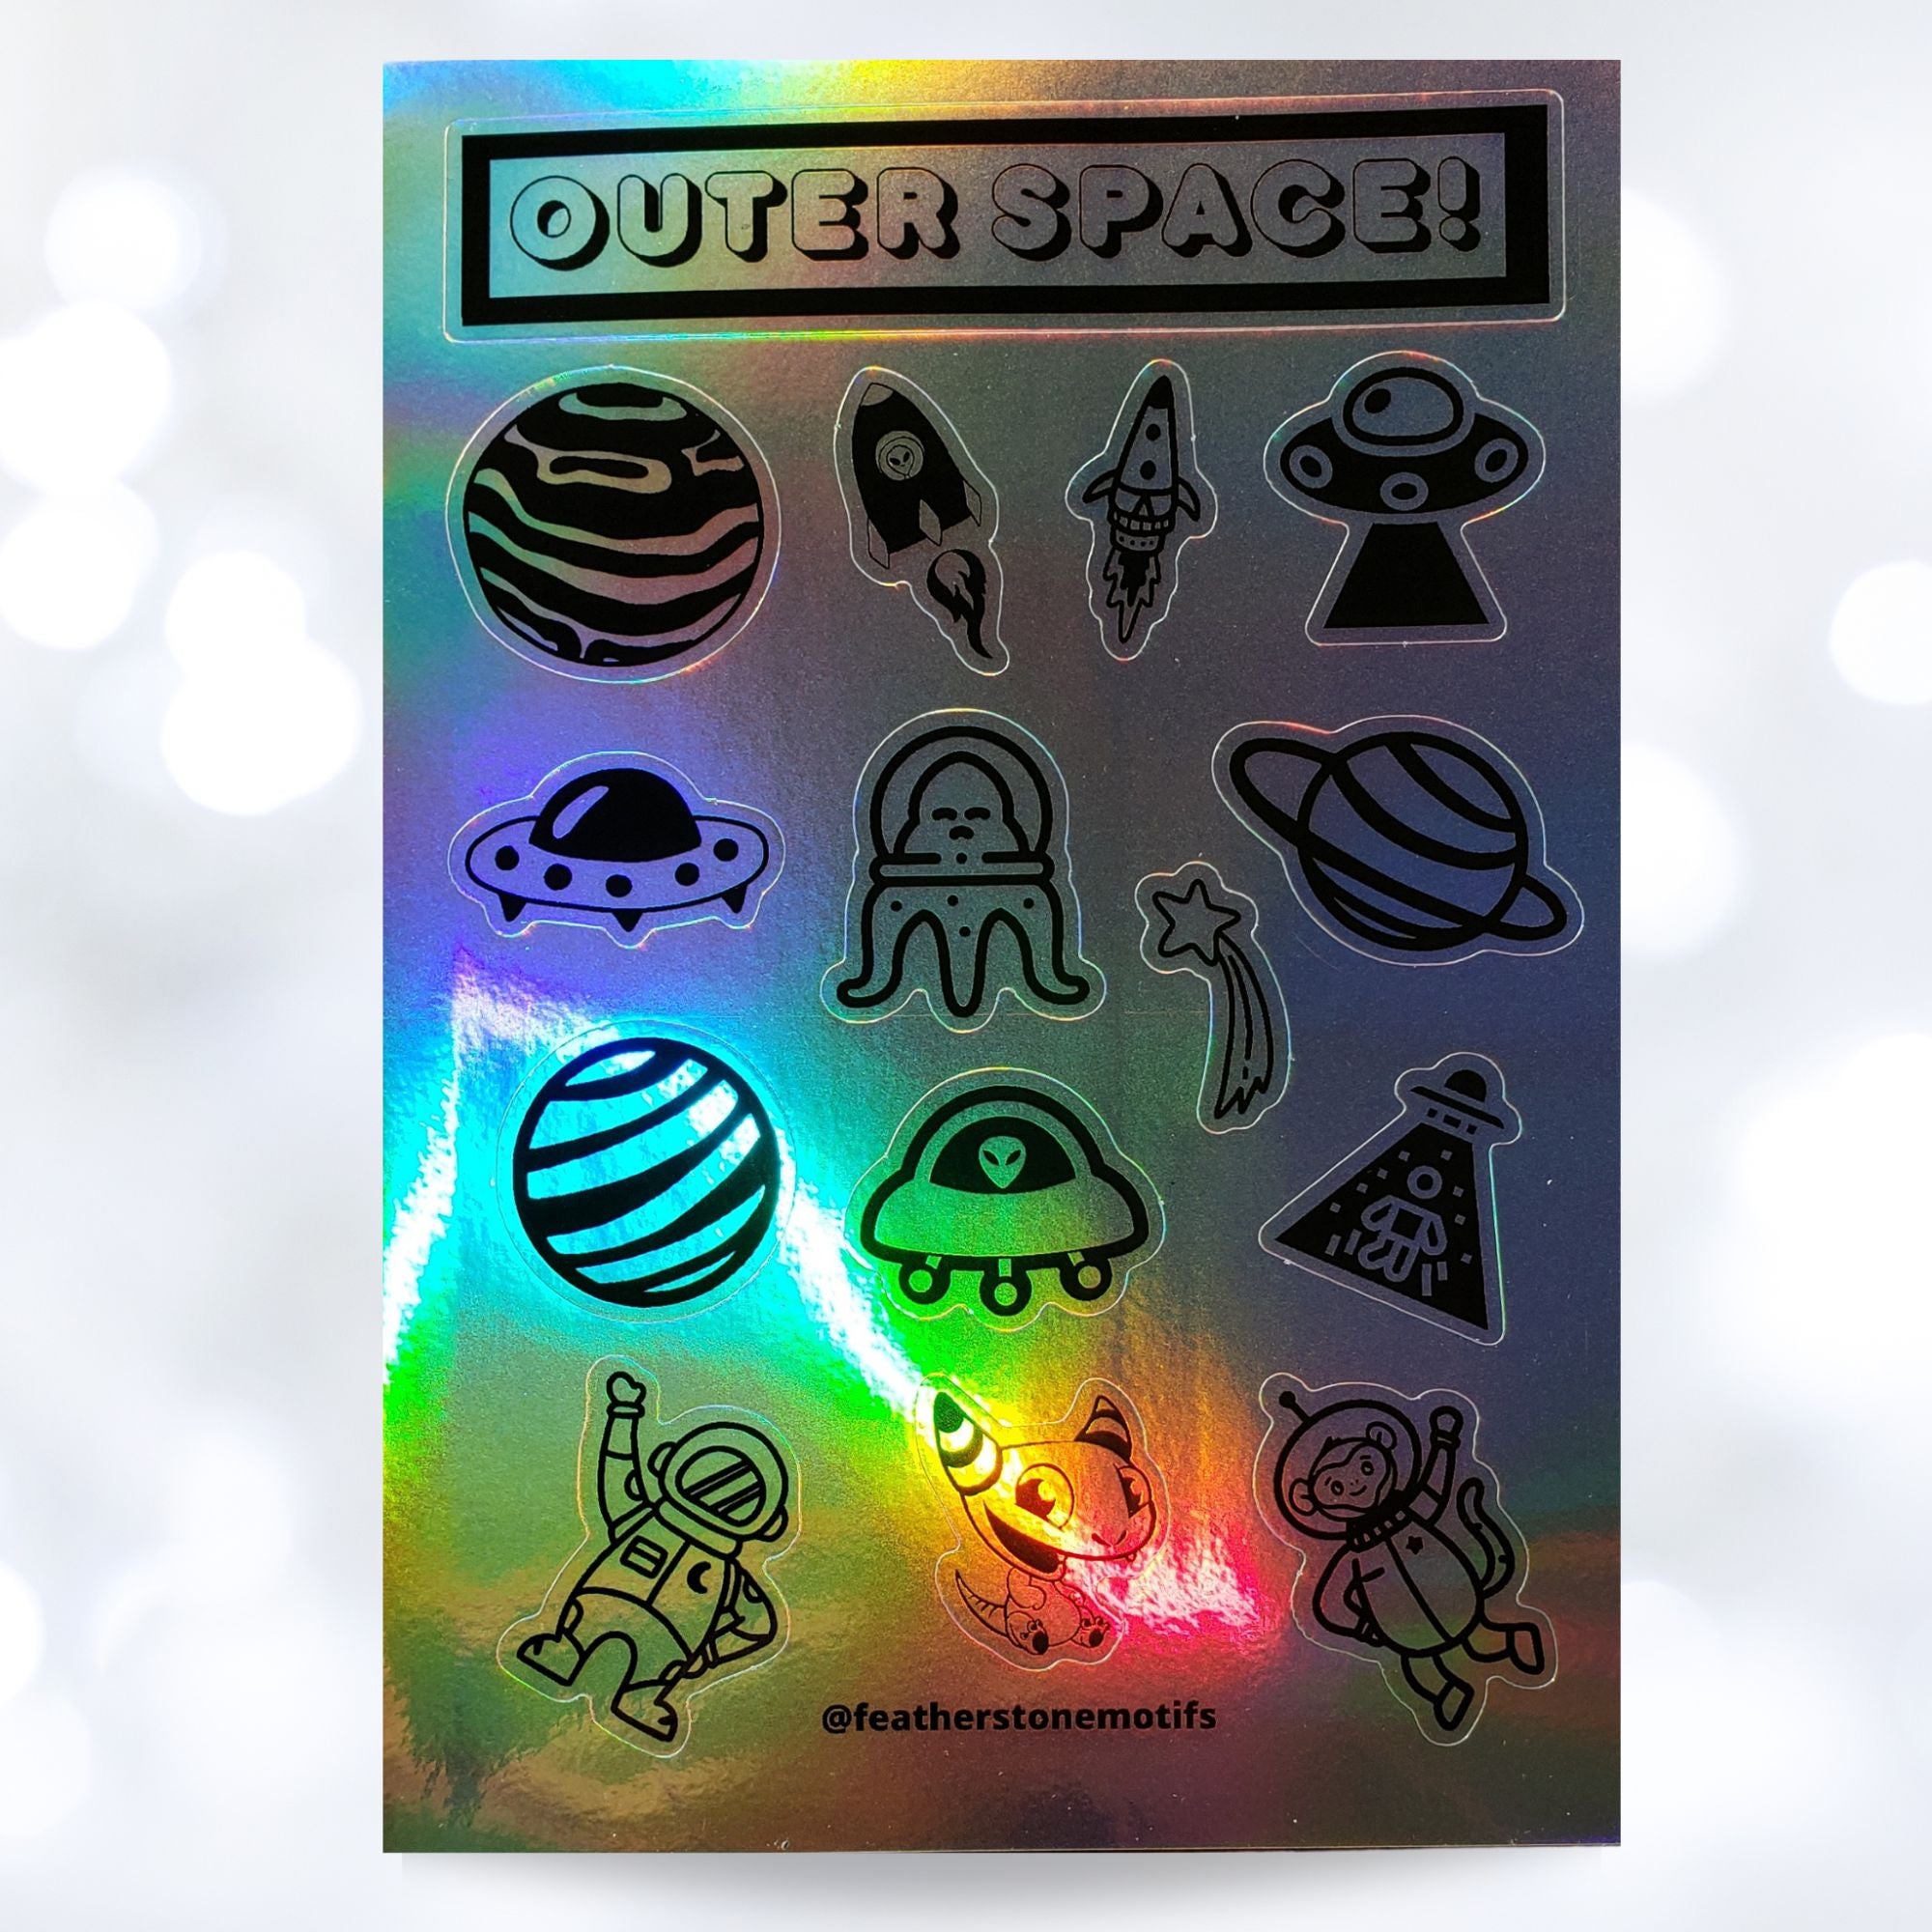 Flying saucers, aliens, and weird planets, all on a holographic sticker sheet. Outer Space is out of this world!